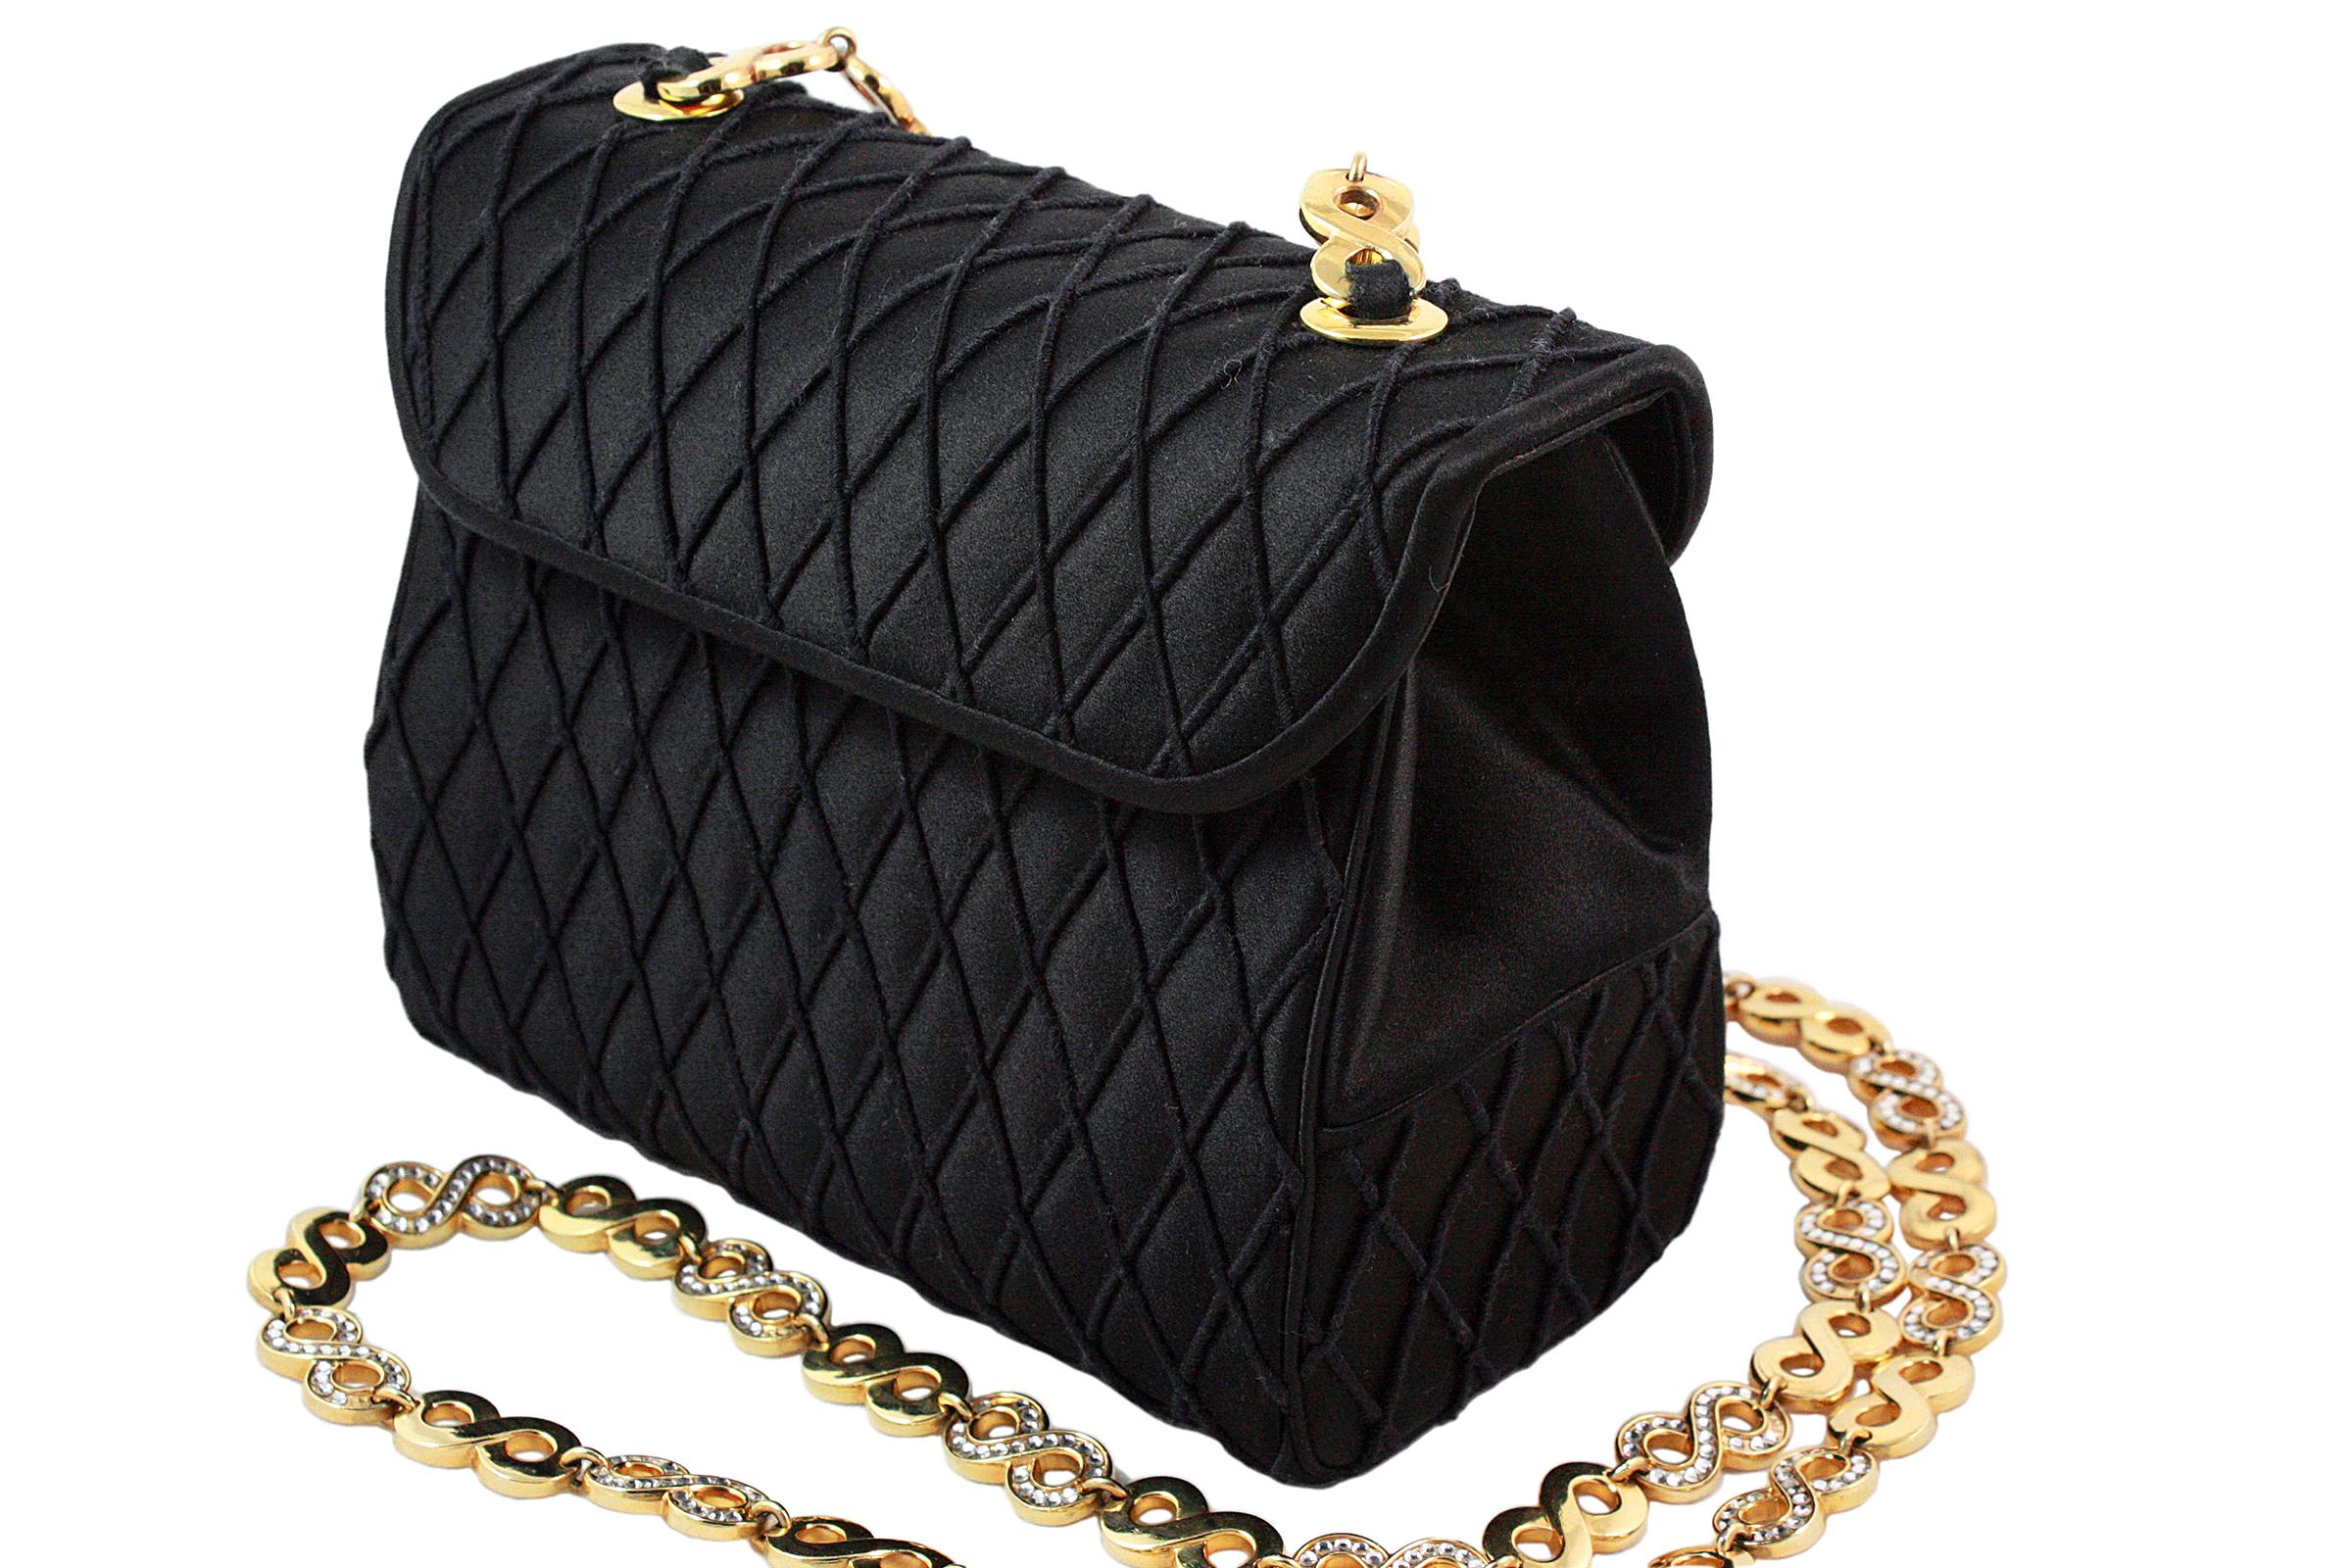 Judith Leiber crossbody bag 
Black satin with diamond thread pattern 
Hidden gold snap closure 
Gold rhinestone infinity chain strap 
Black satin lining
Inner card slot and zippered pocket
Comes with black coin purse, gold mirror and blue dust-bag 